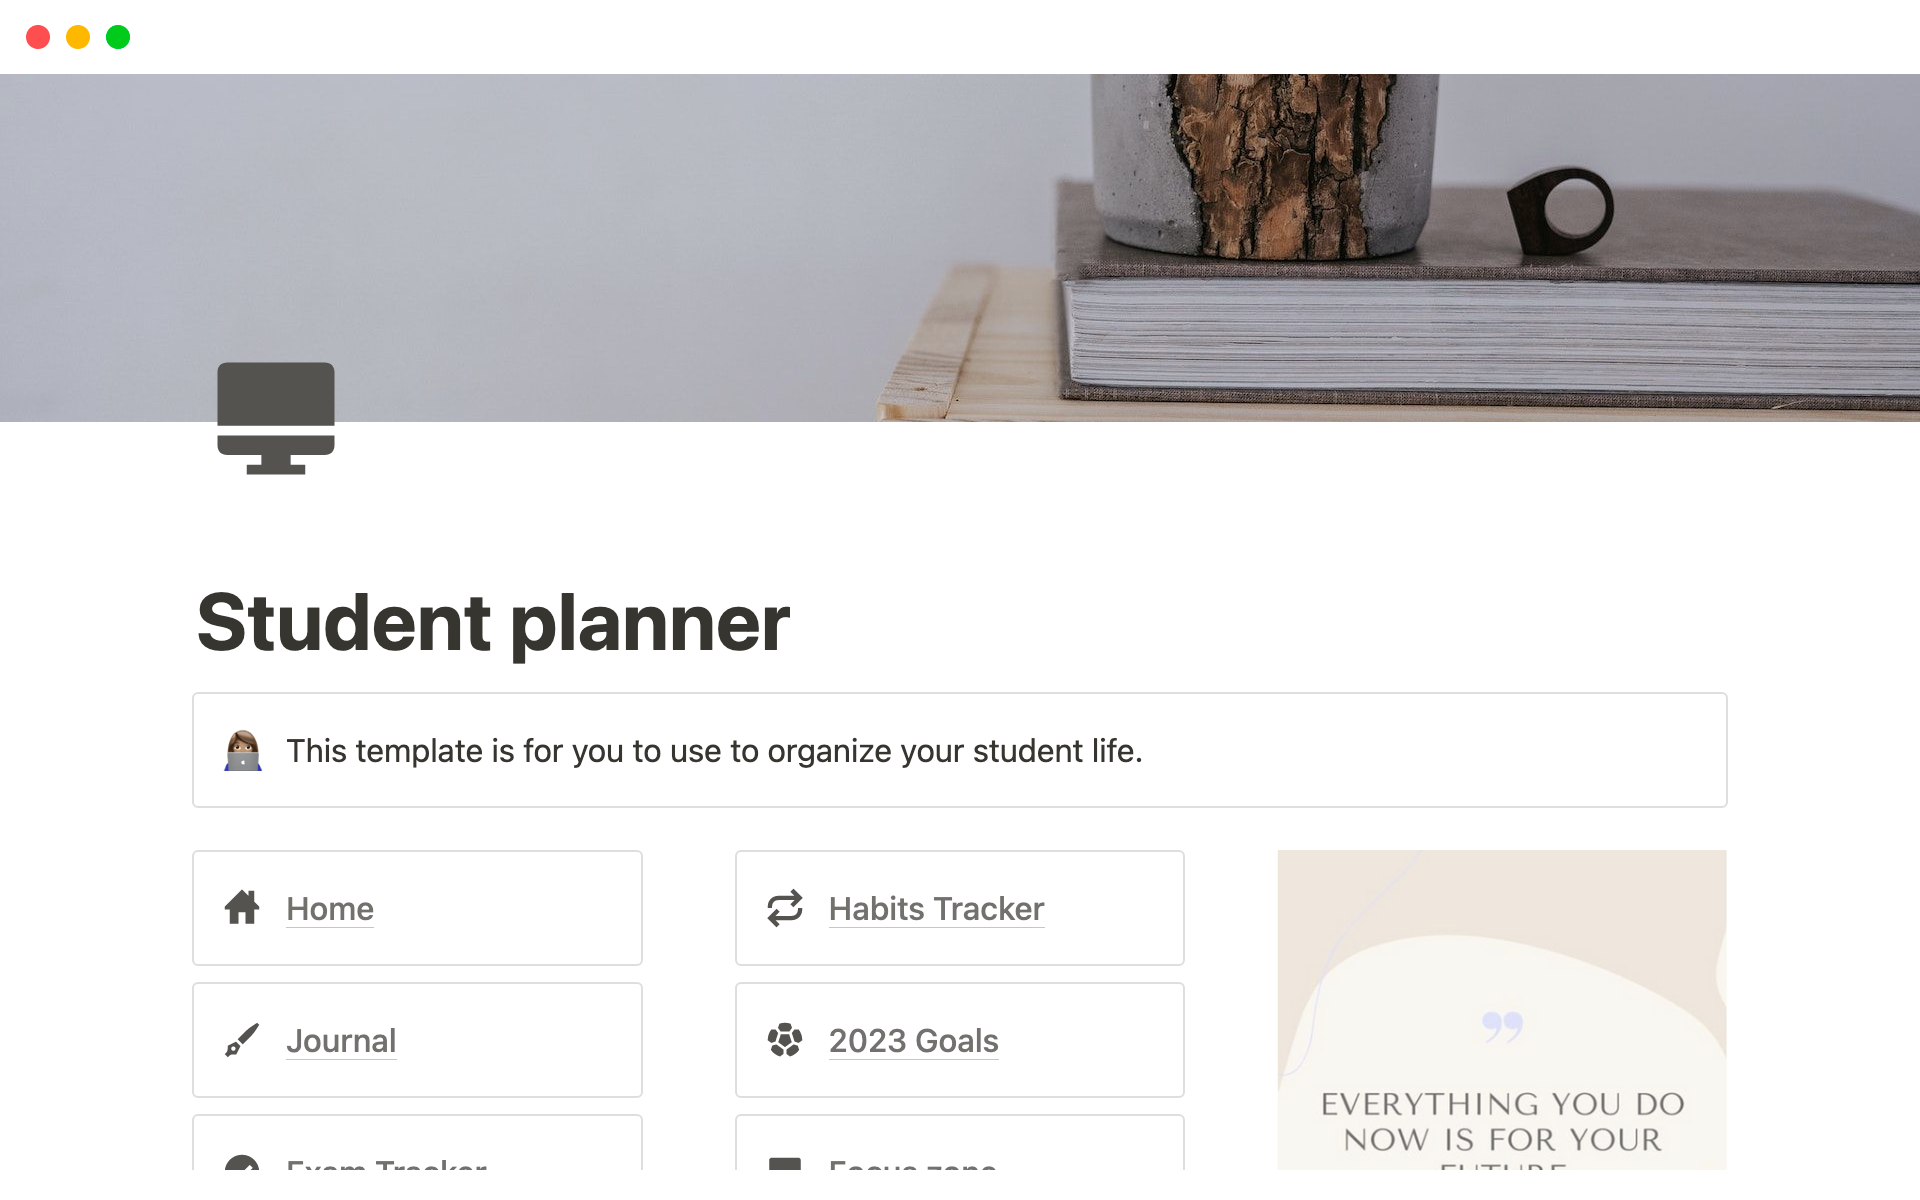 With our template, you can create a customised study schedule, set goals and deadlines, and organise your notes and study materials in a way that makes sense to you